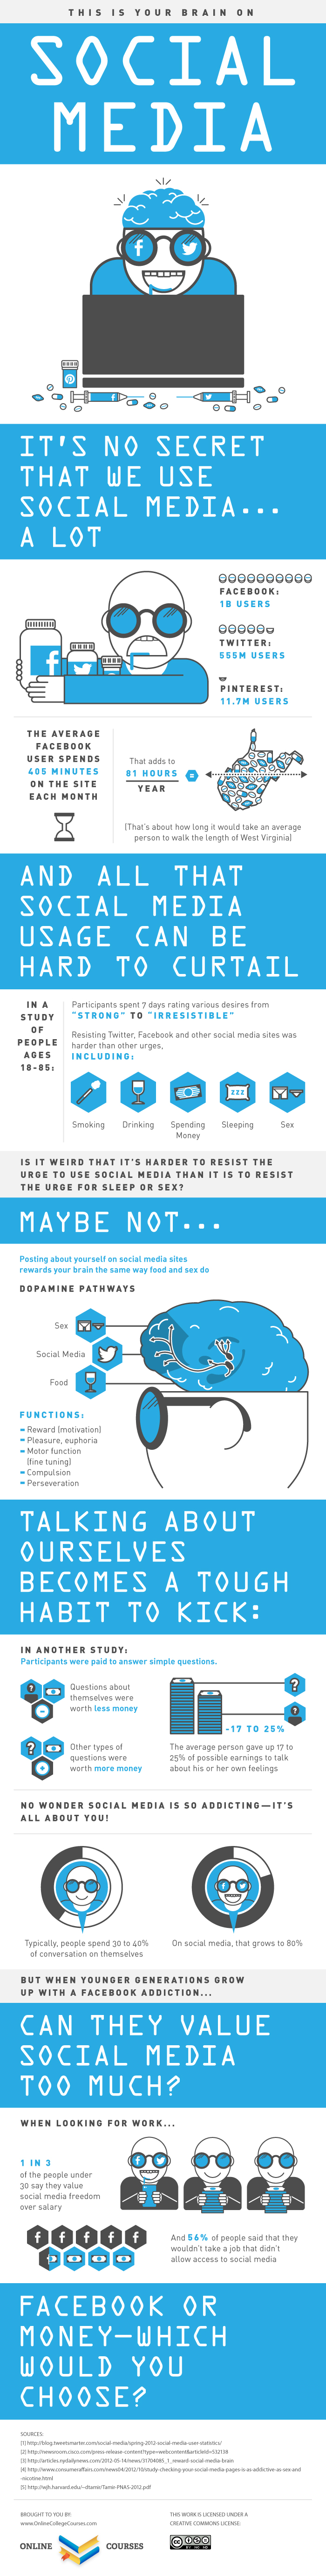 Your Brain on Social Media Infographic